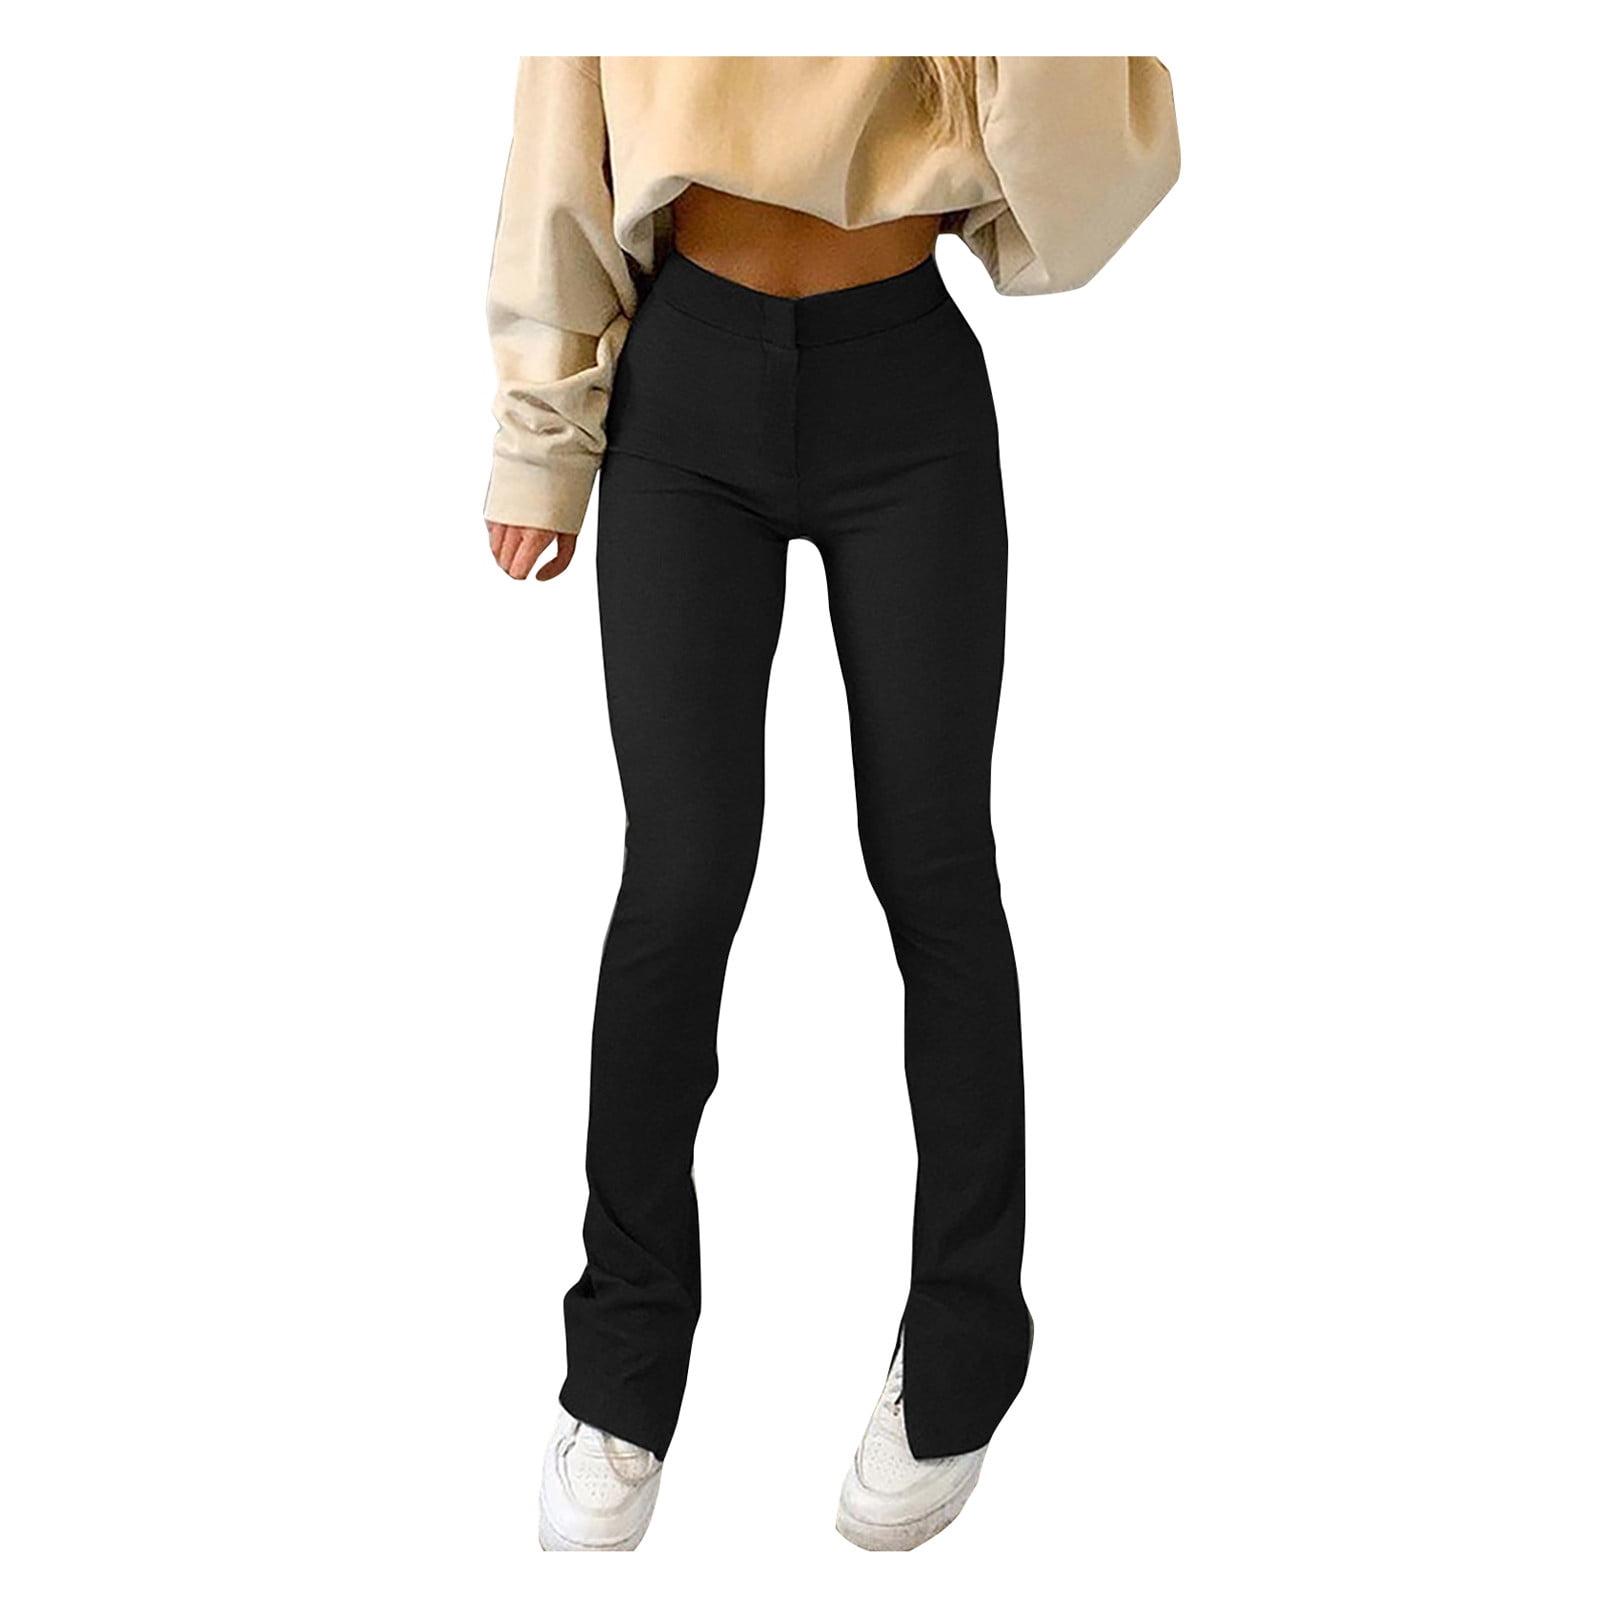 vbnergoie Women's Casual Running Tights Solid Color -lifting Slim